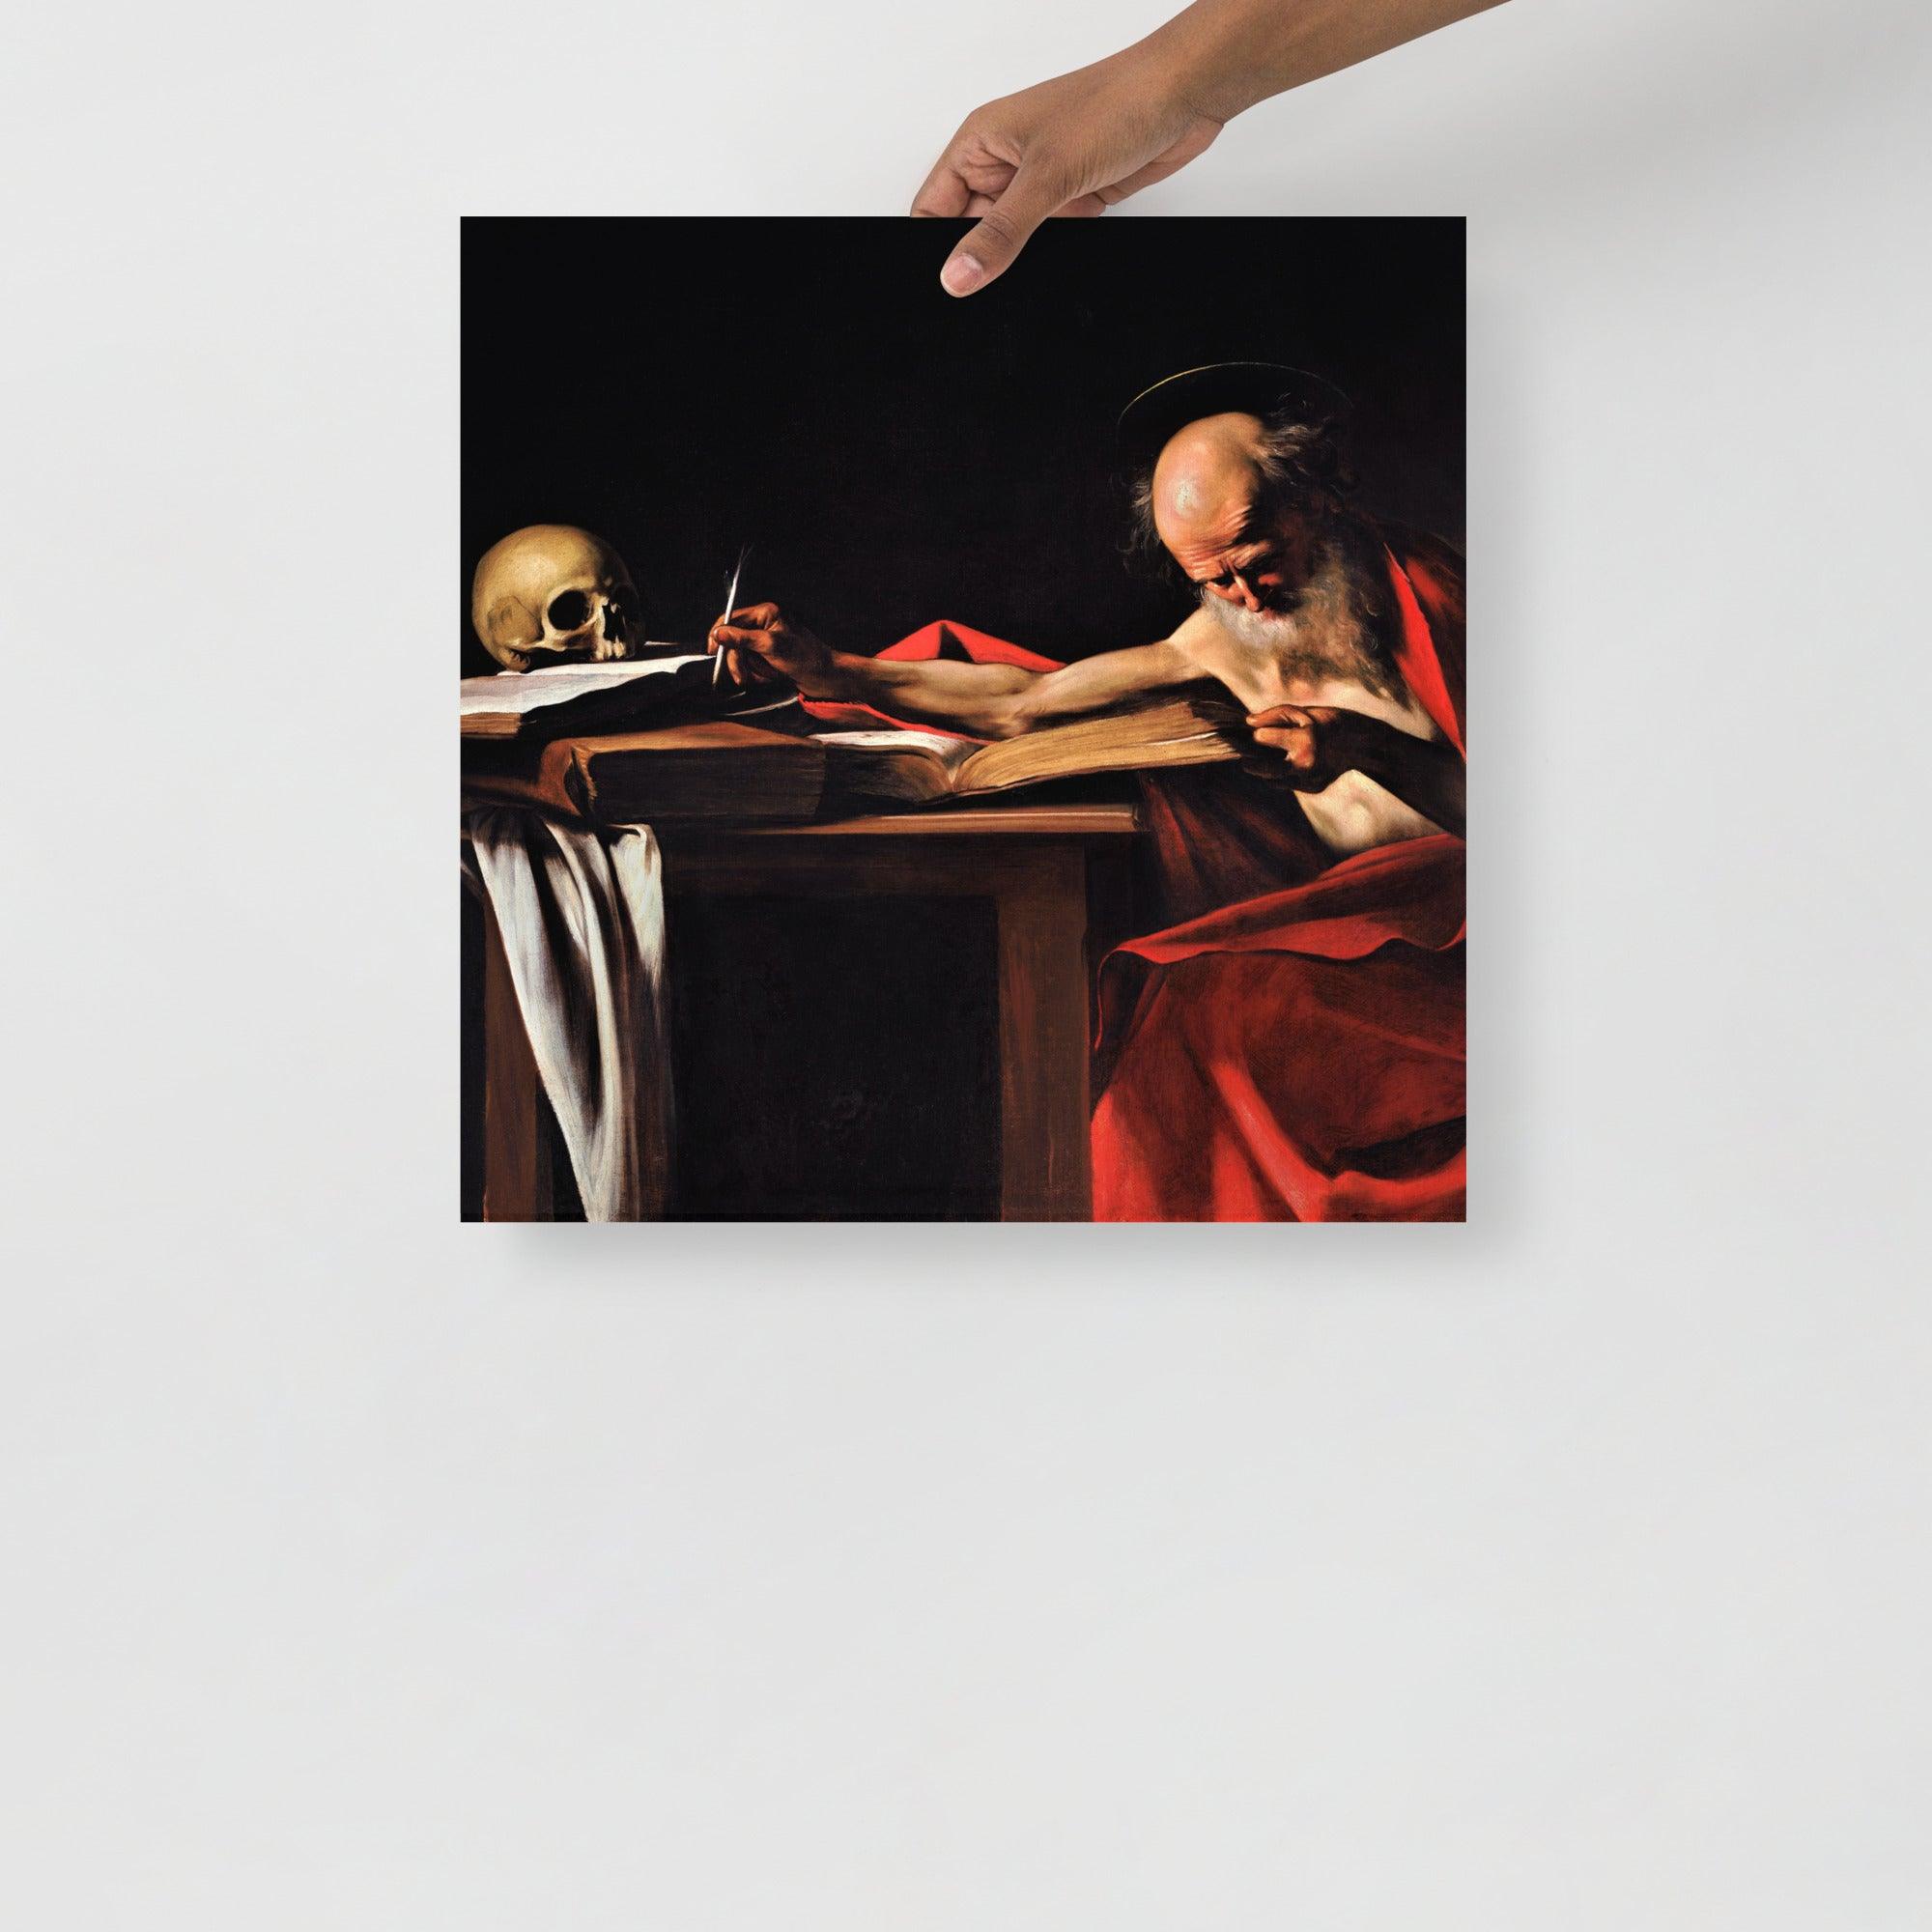 A Saint Jerome Writing by Caravaggio poster on a plain backdrop in size 18x18”.